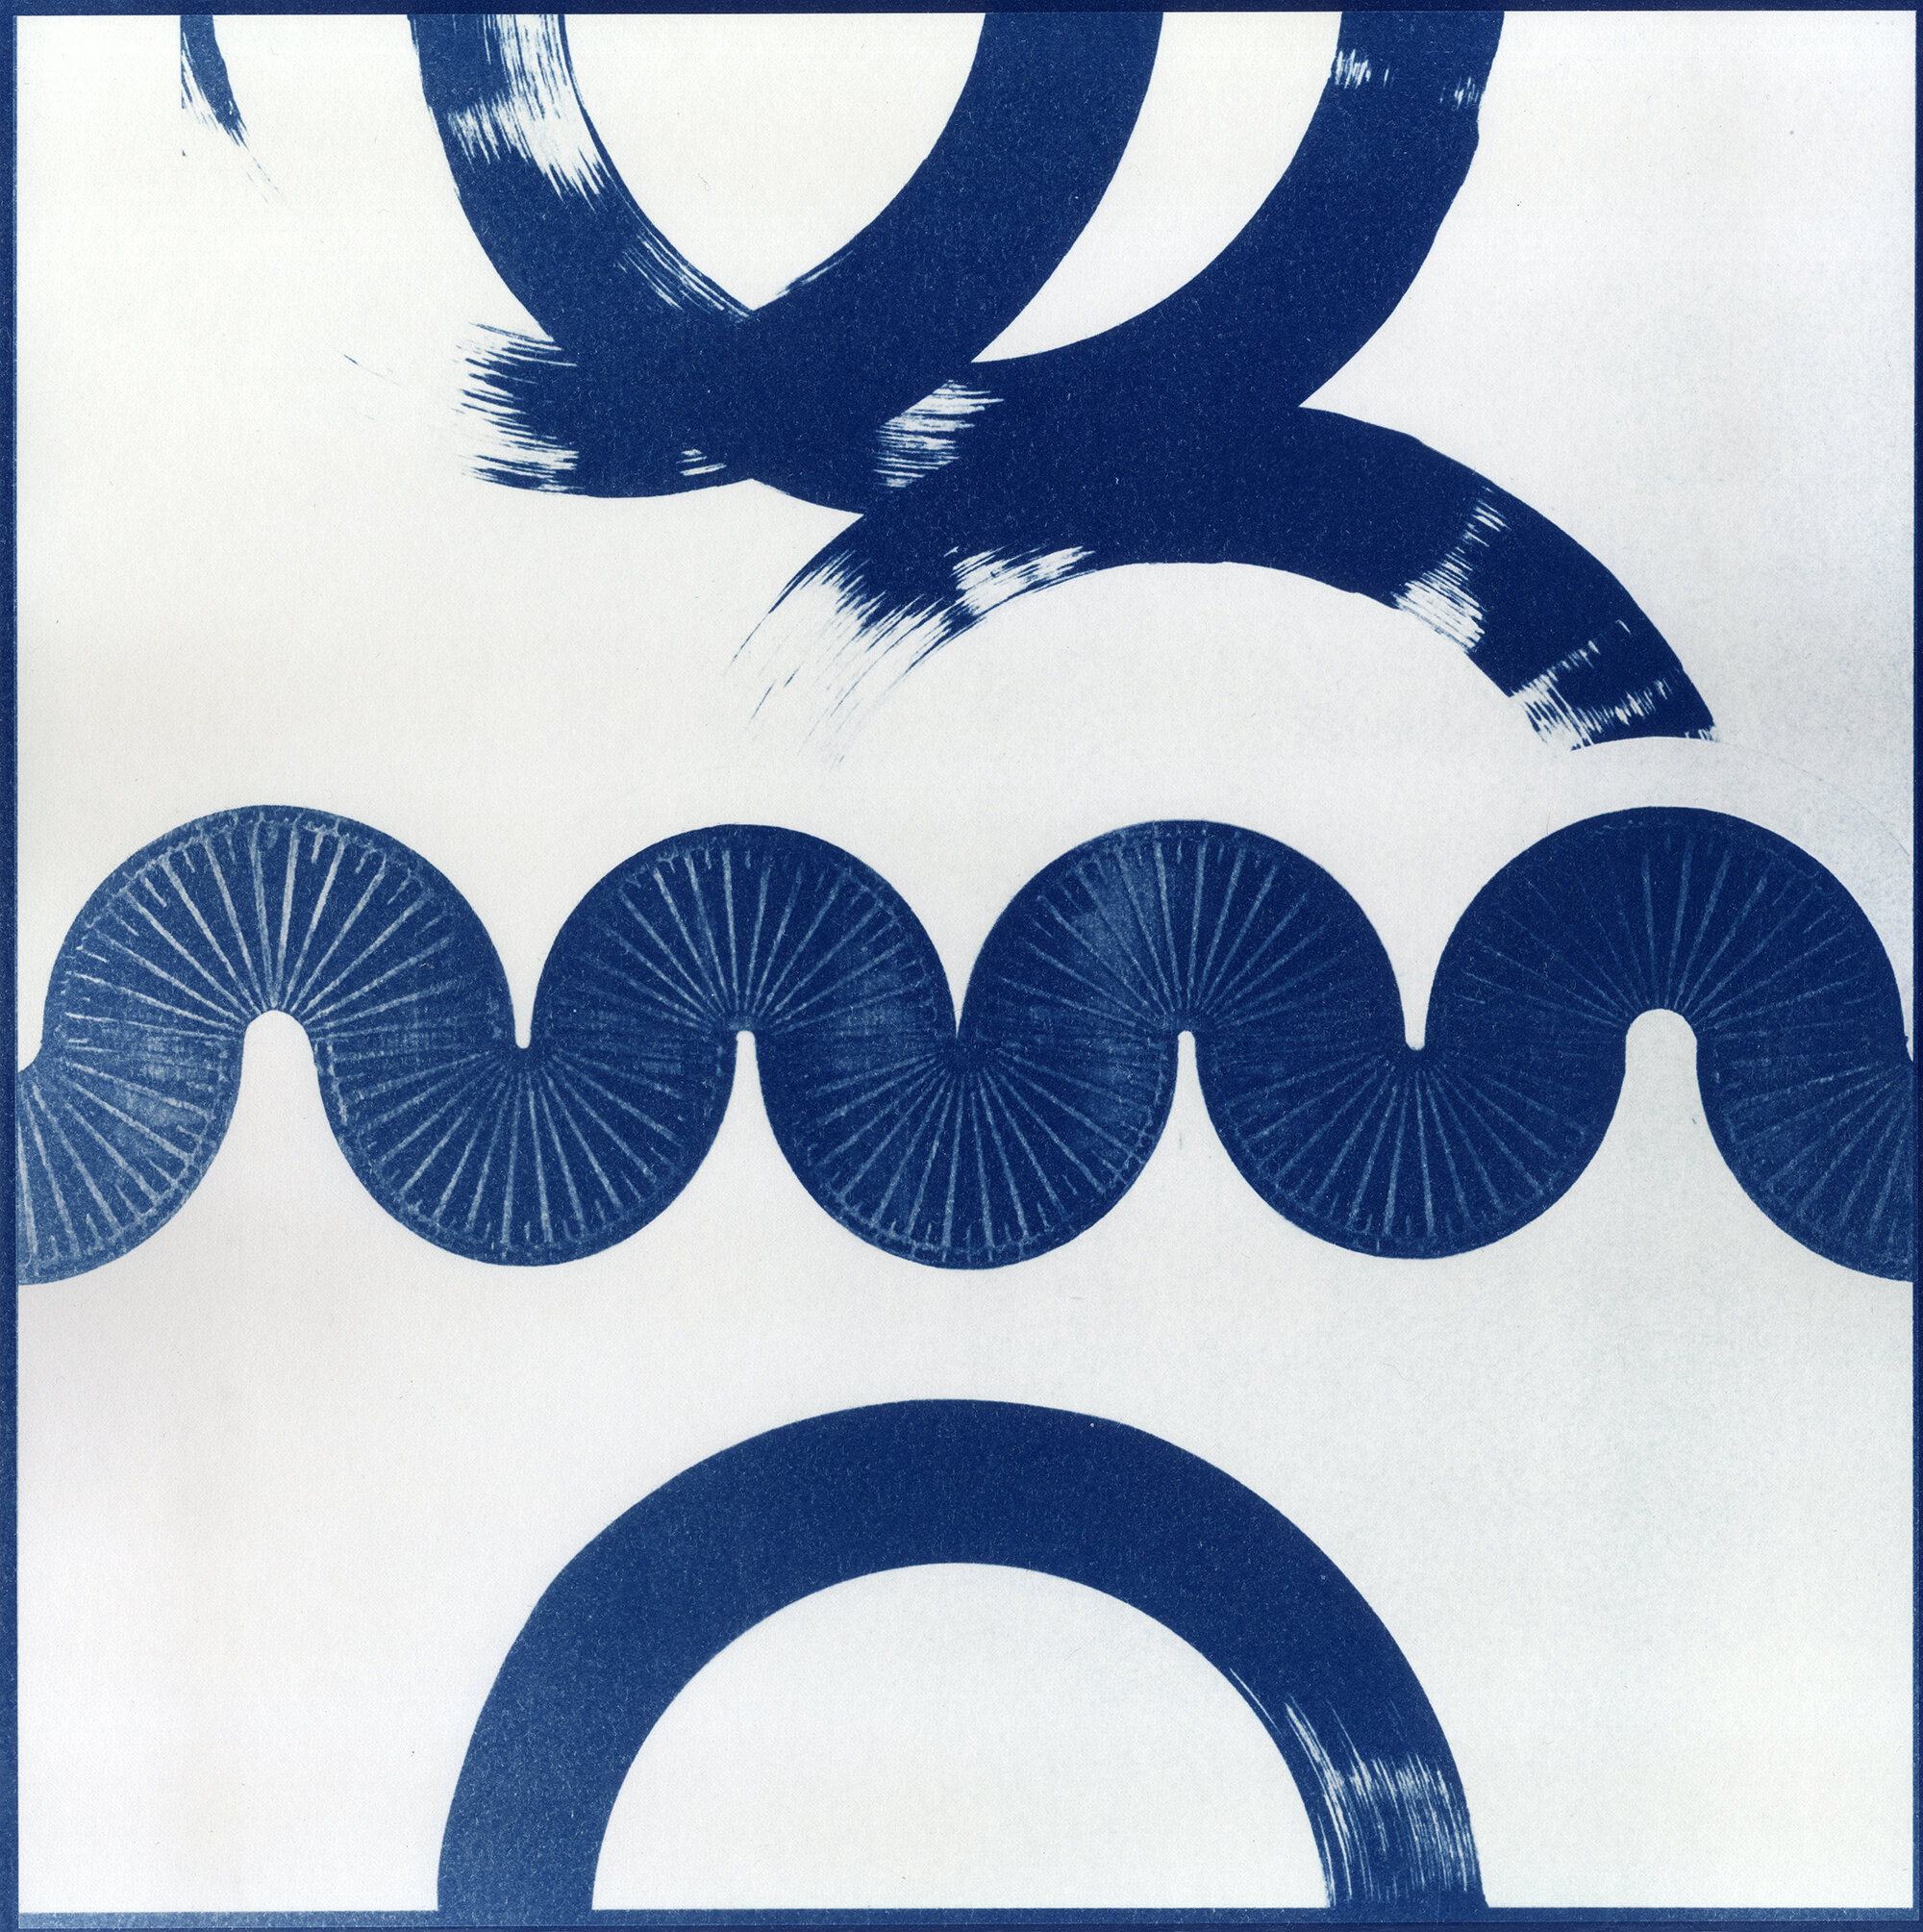   Love without Lovers Nº.  3 (cyanotype)  2015/2020 Cyanotype on paper 12 x 12 in Edition of 5 